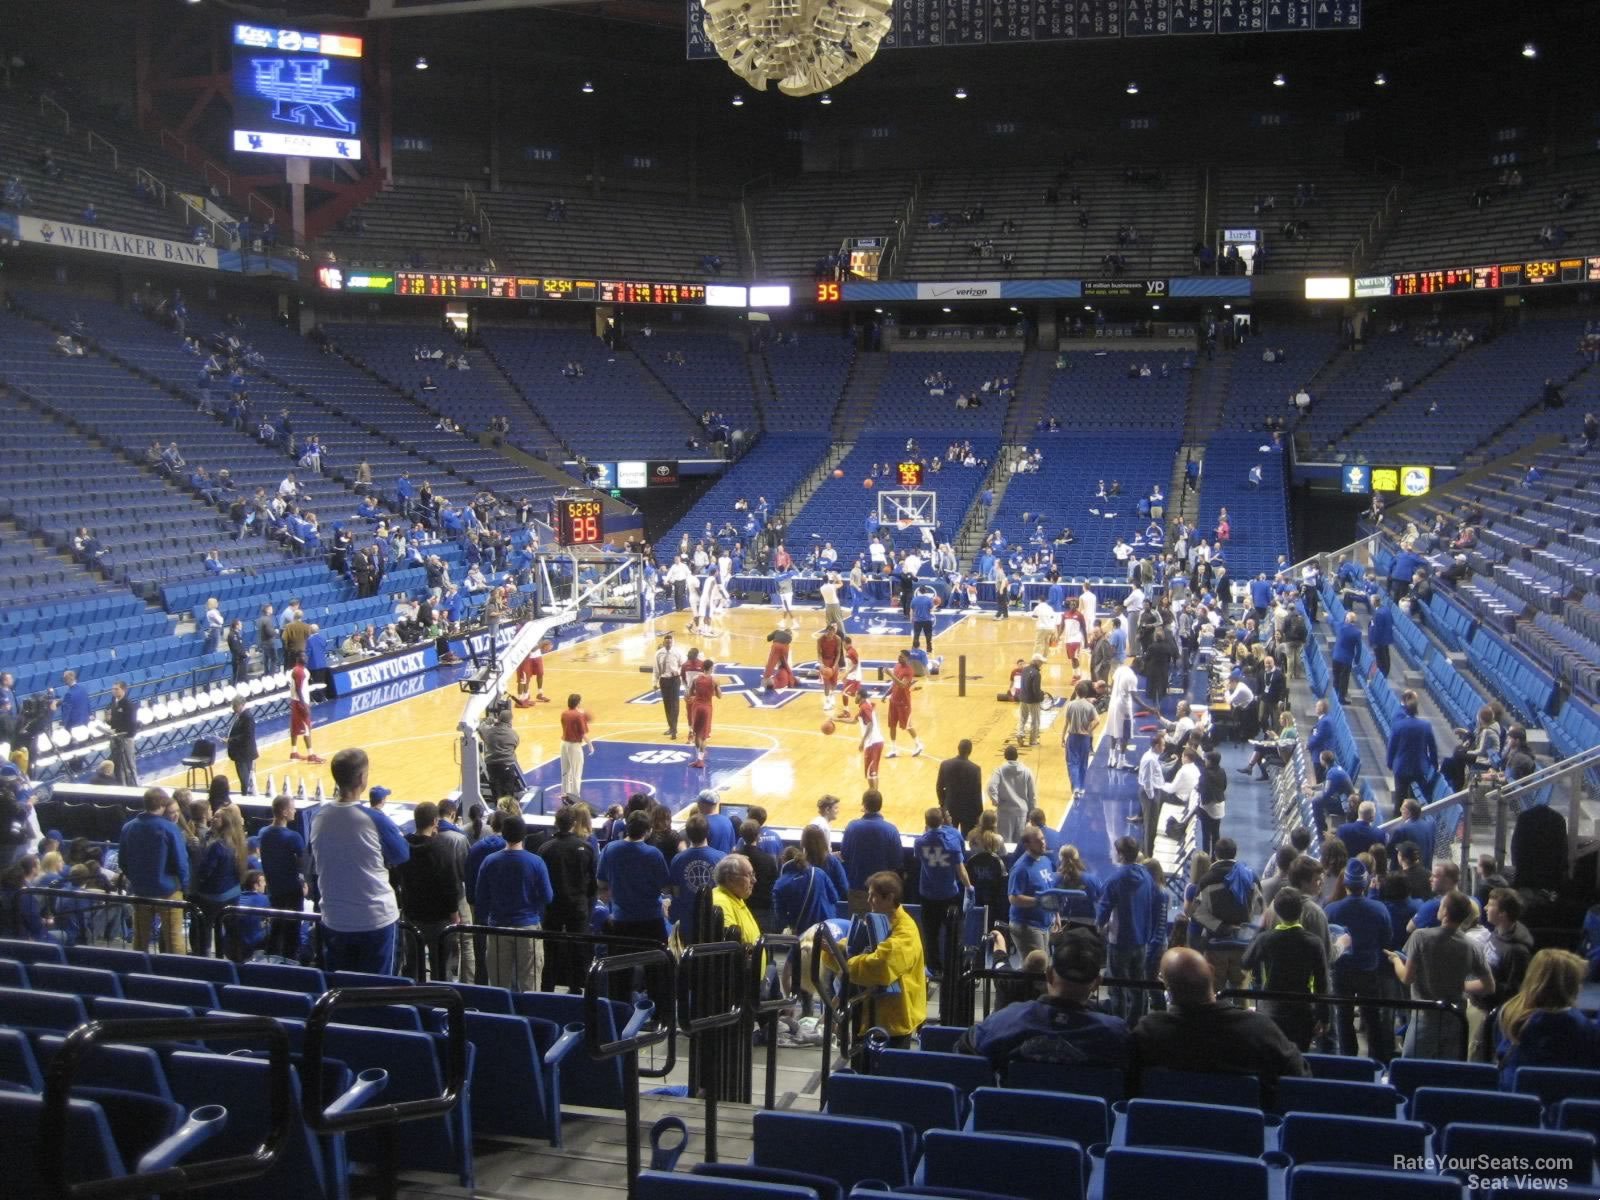 section 38, row mm seat view  for basketball - rupp arena